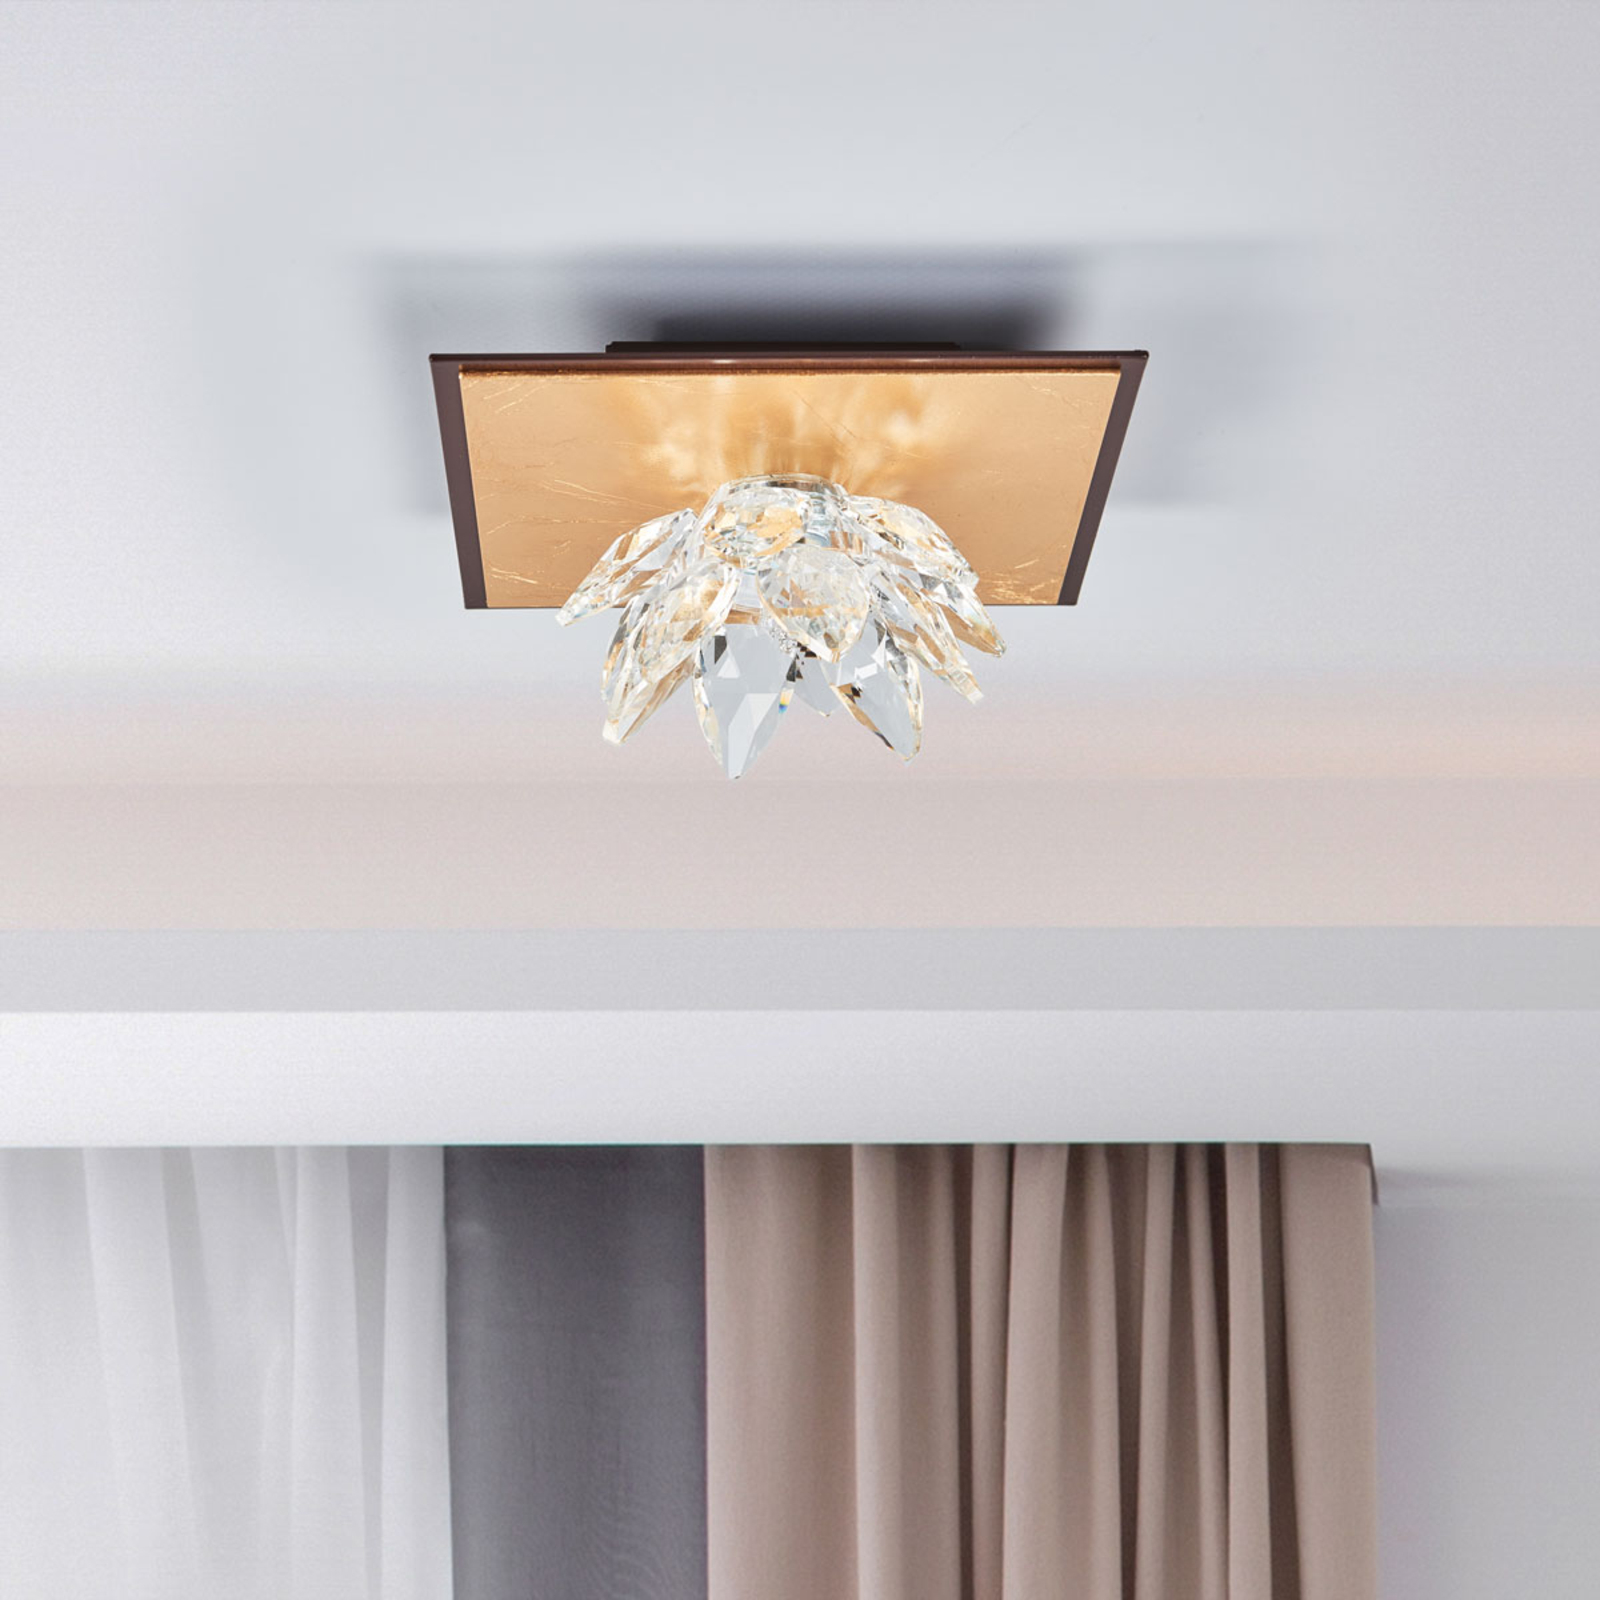 Fiore ceiling light, gold leaf and crystal, 1-bulb